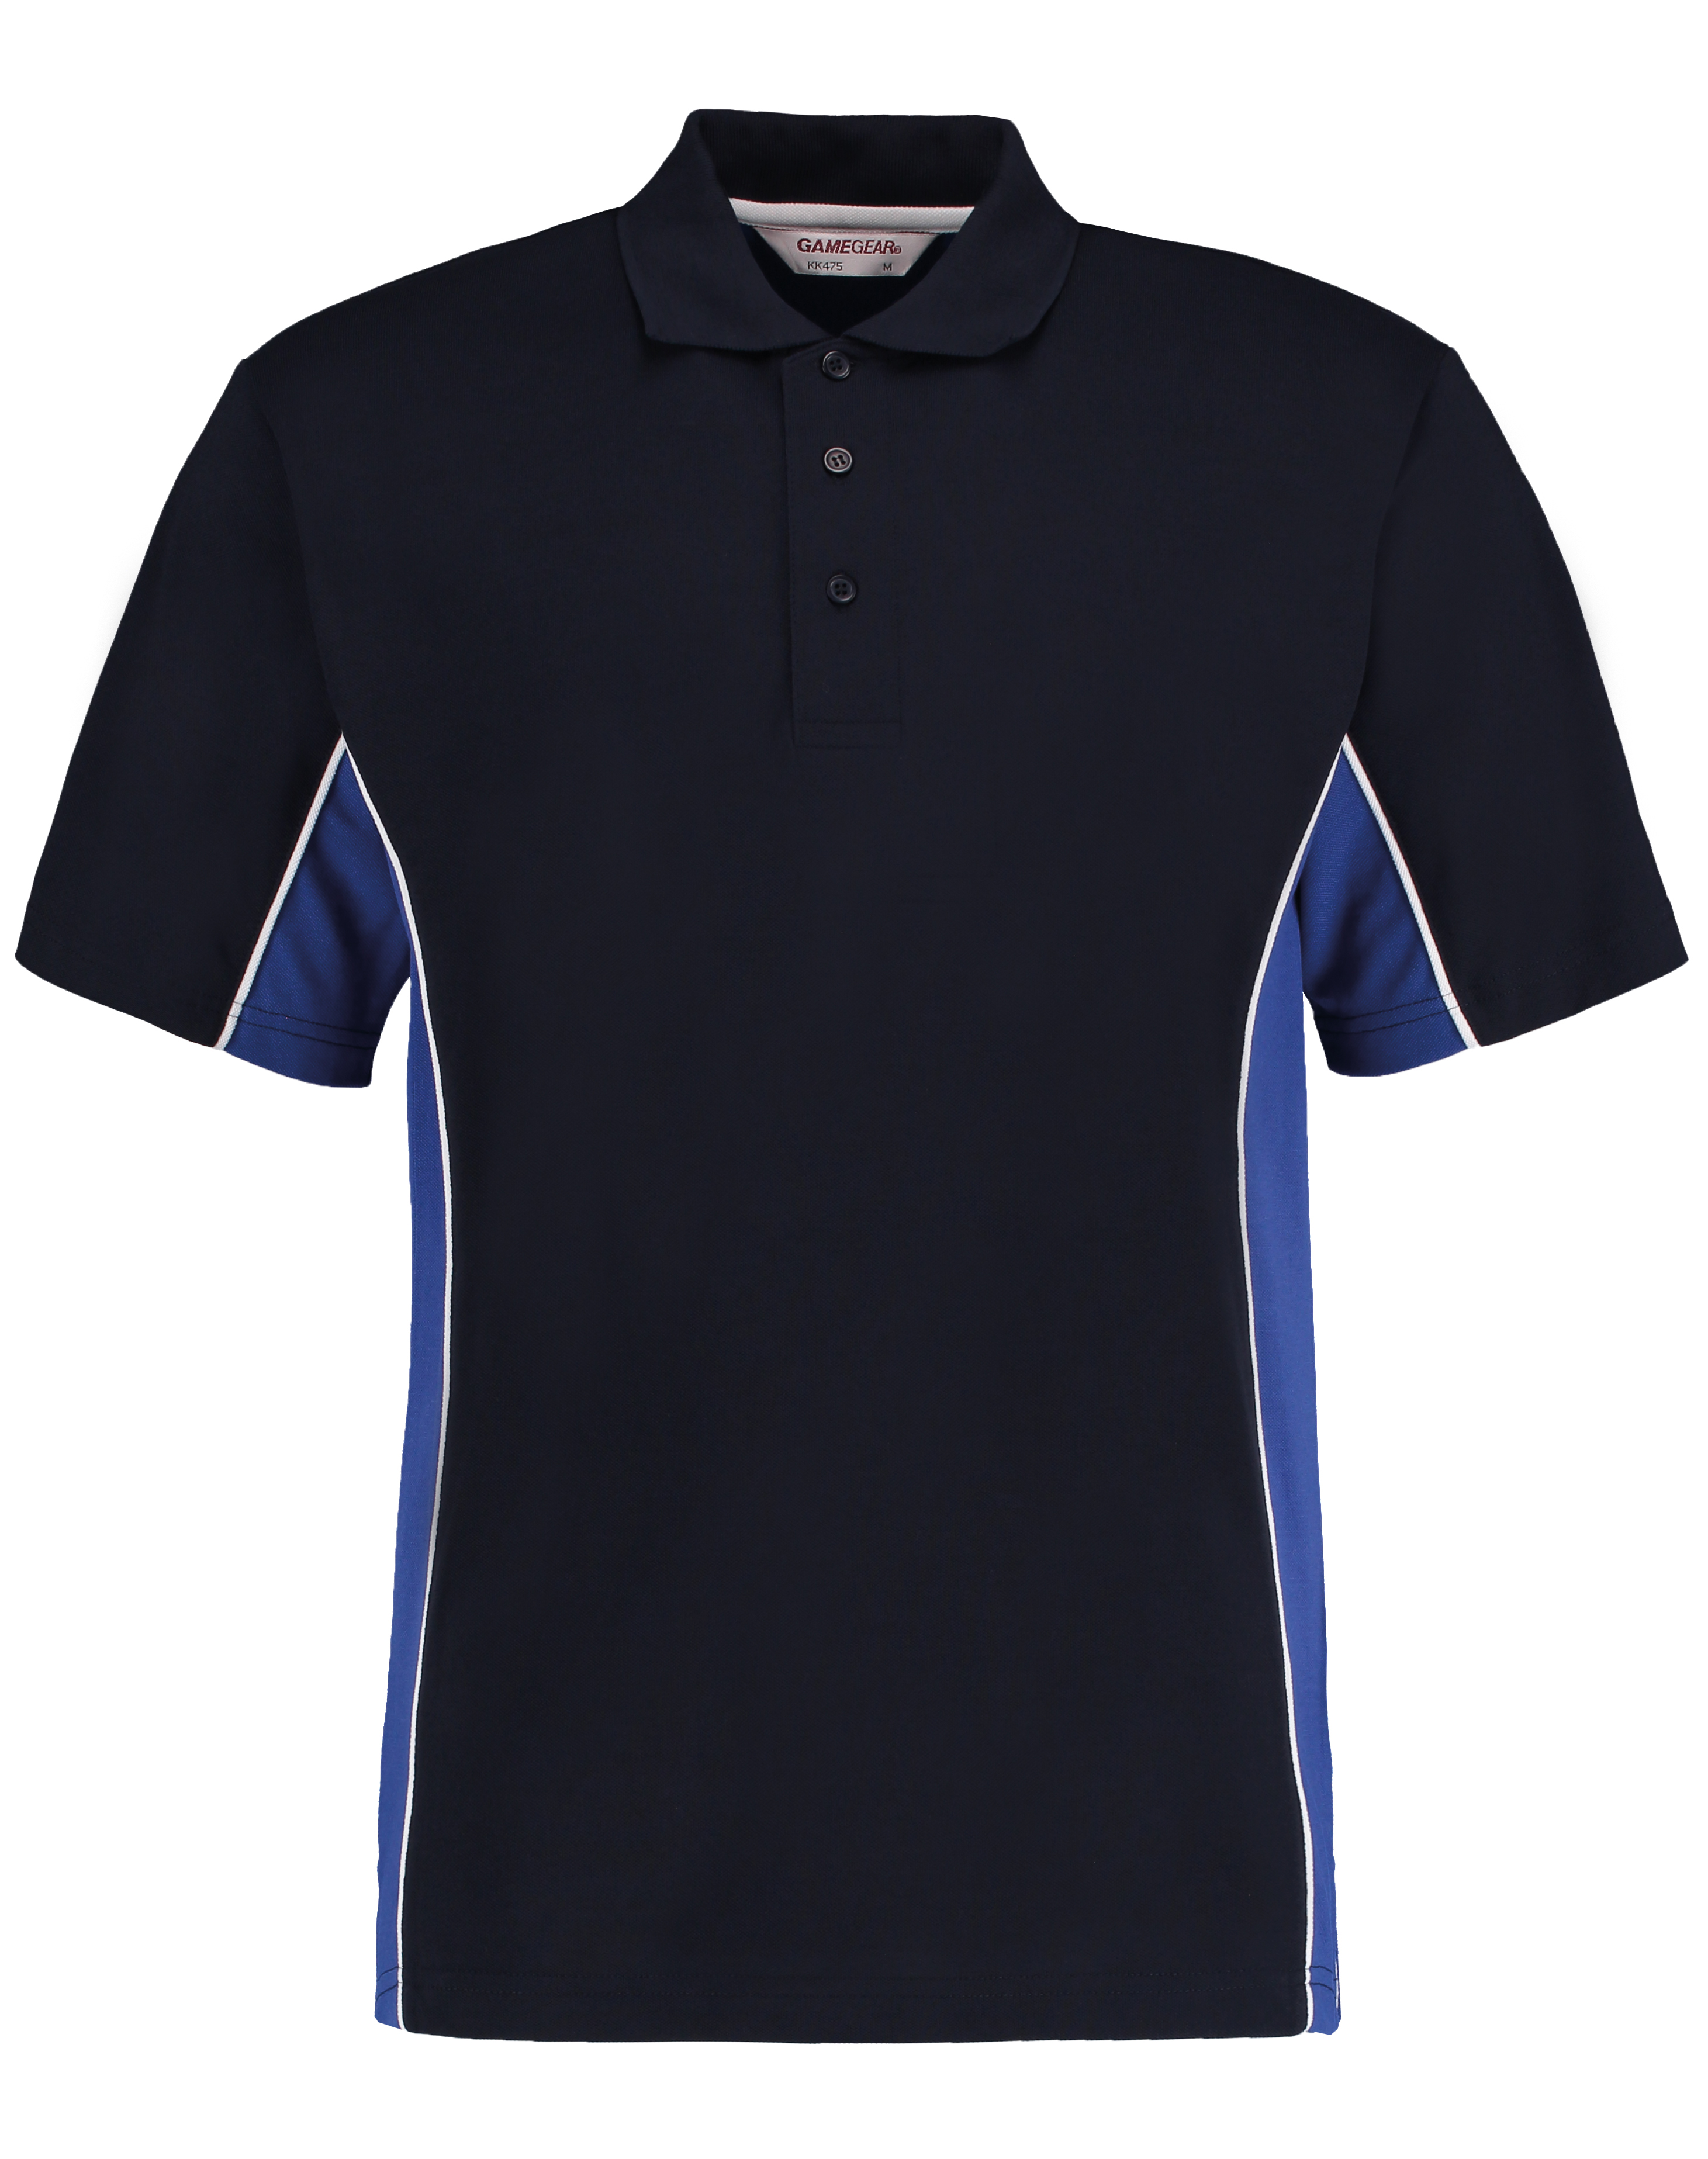 ax-httpswebsystems.s3.amazonaws.comtmp_for_downloadgamegear-navy-royal-white.jpg